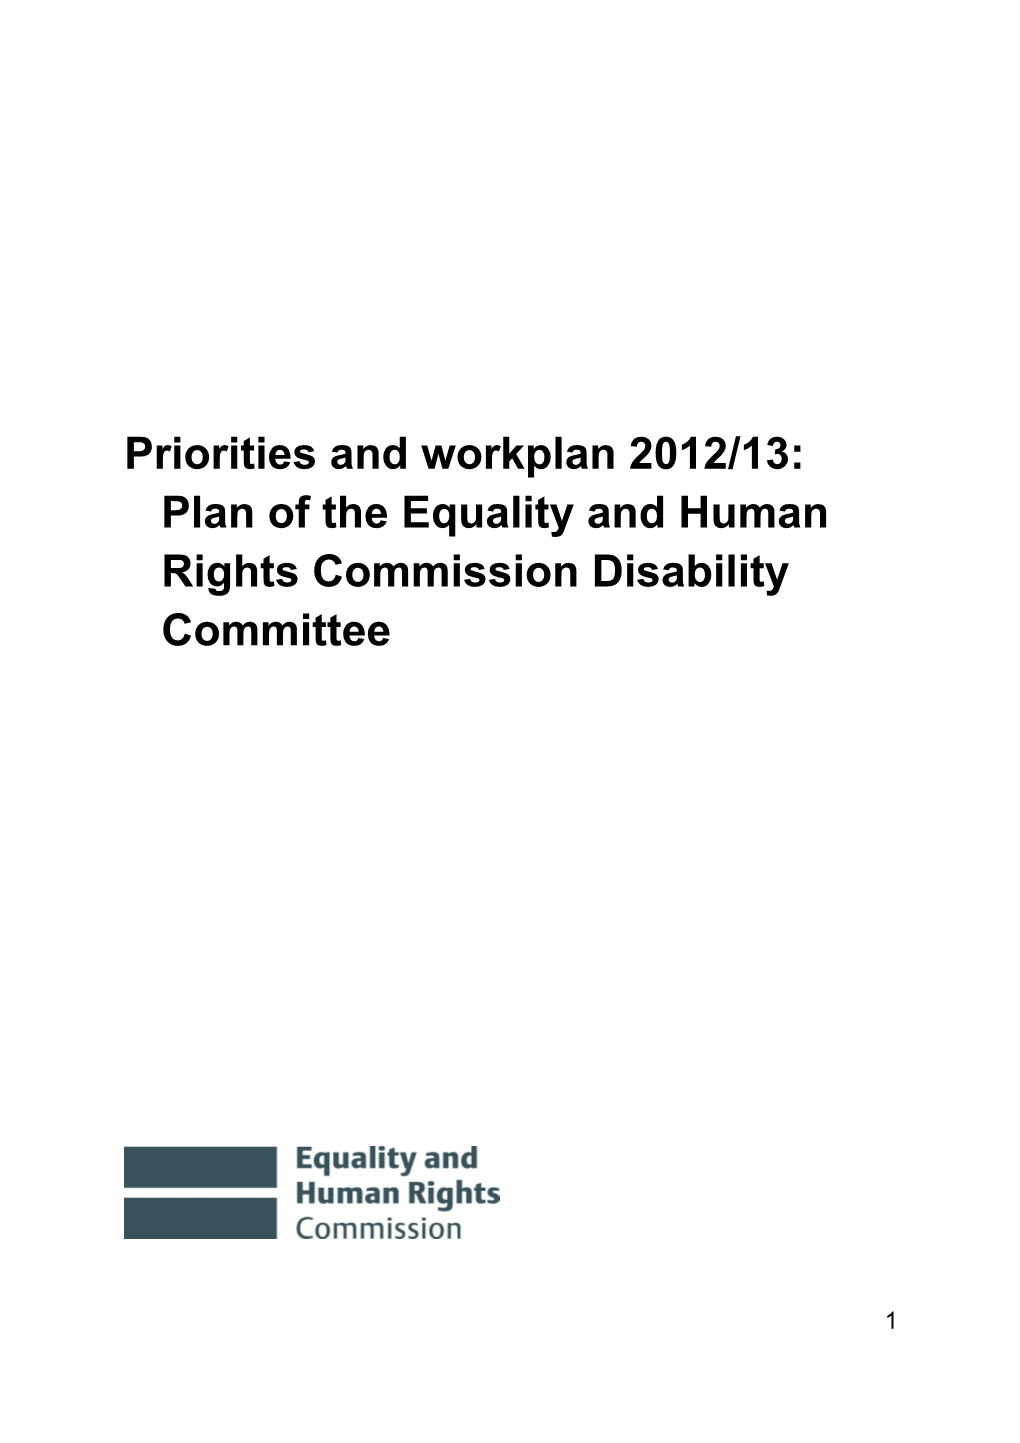 Priorities and Workplan 2012/13: Plan of the Equality and Human Rights Commission Disability